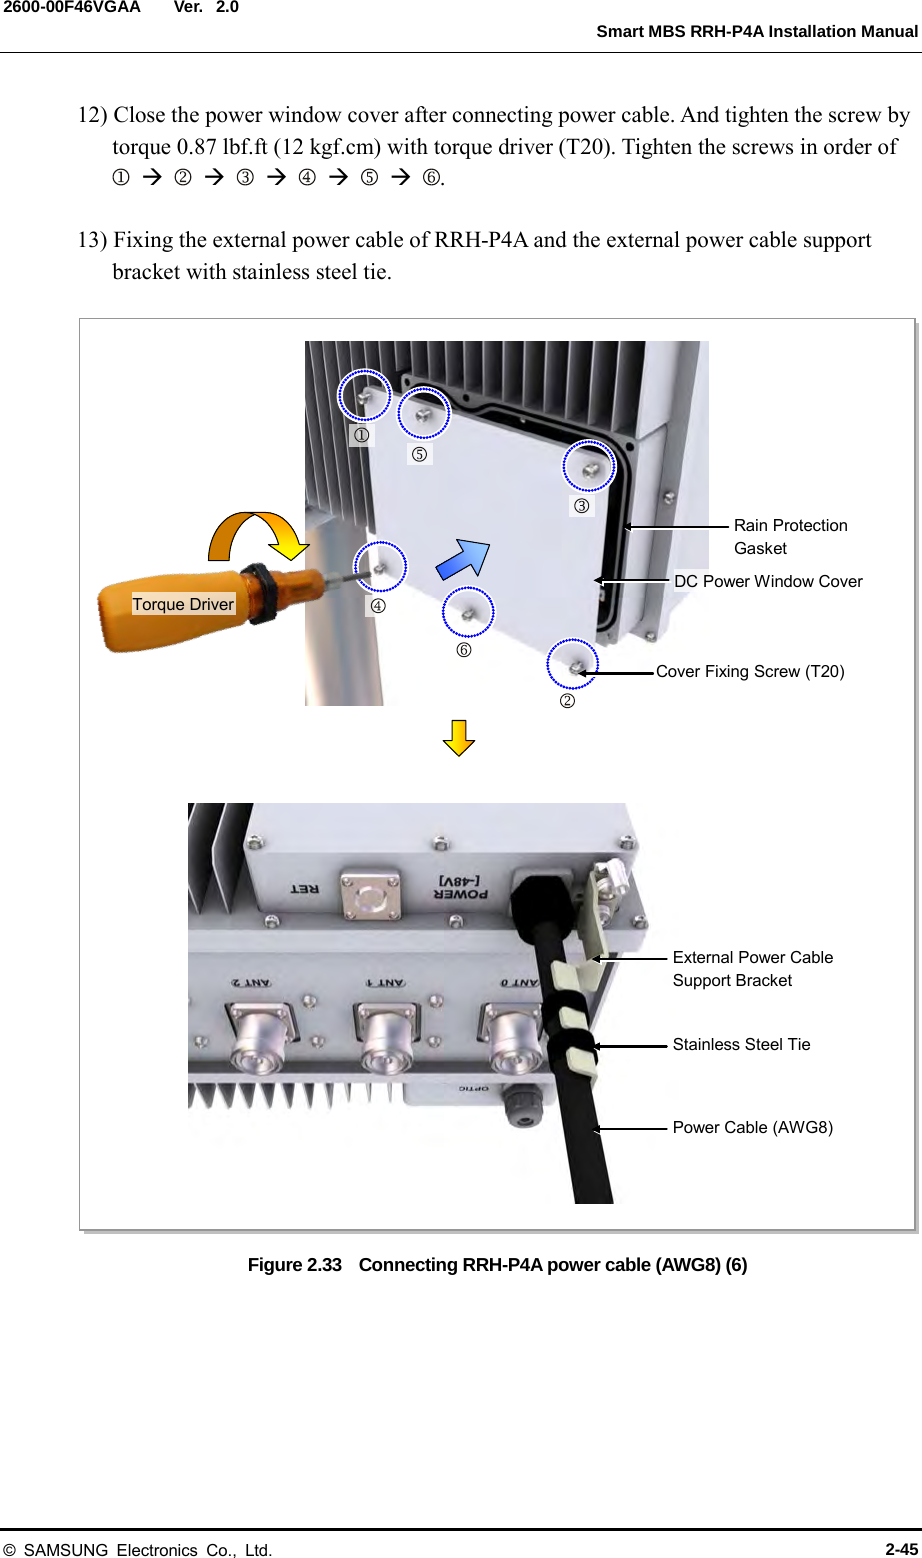  Ver.   Smart MBS RRH-P4A Installation Manual 2600-00F46VGAA 2.0 12) Close the power window cover after connecting power cable. And tighten the screw by torque 0.87 lbf.ft (12 kgf.cm) with torque driver (T20). Tighten the screws in order of                    .  13) Fixing the external power cable of RRH-P4A and the external power cable support bracket with stainless steel tie.  Figure 2.33    Connecting RRH-P4A power cable (AWG8) (6)   Cover Fixing Screw (T20) DC Power Window Cover Torque Driver External Power Cable Support Bracket Stainless Steel Tie Power Cable (AWG8) Rain Protection Gasket       © SAMSUNG Electronics Co., Ltd. 2-45 